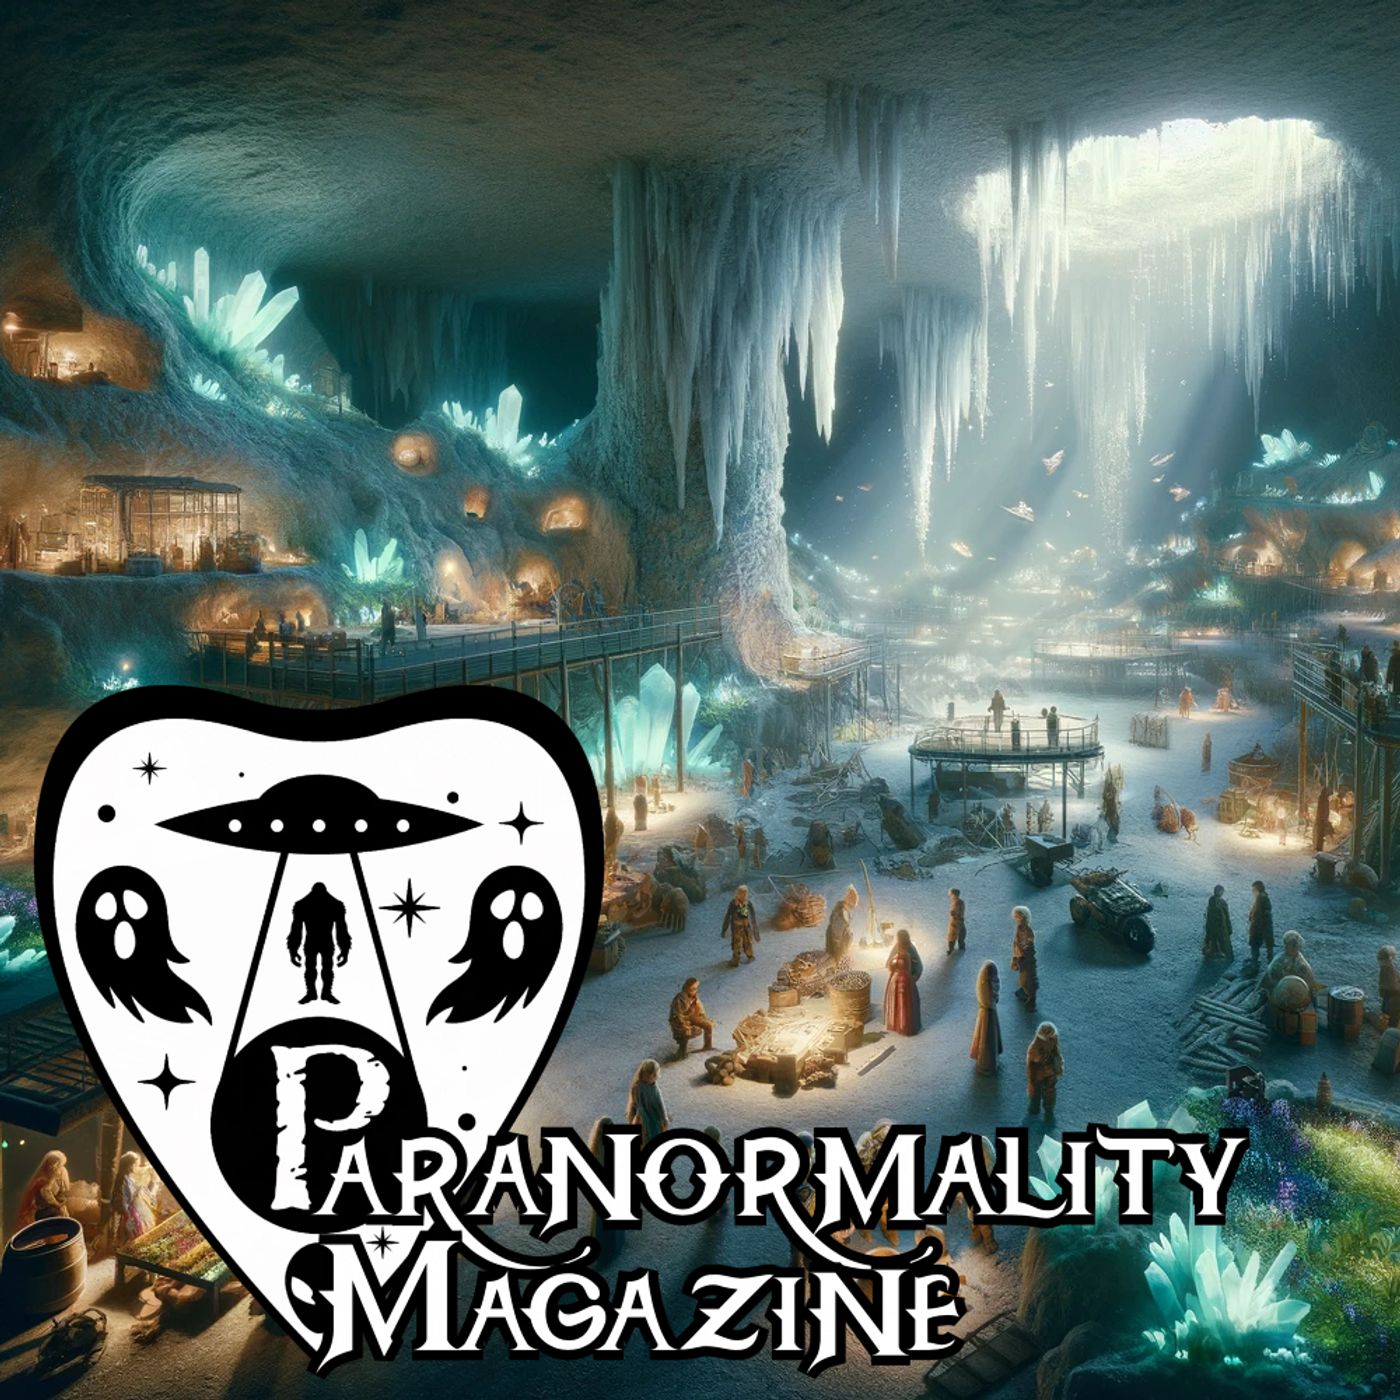 “ANOMALIES HINTING AT A HOLLOW EARTH” and More Fortean-Related Stories! #ParanormalityMag